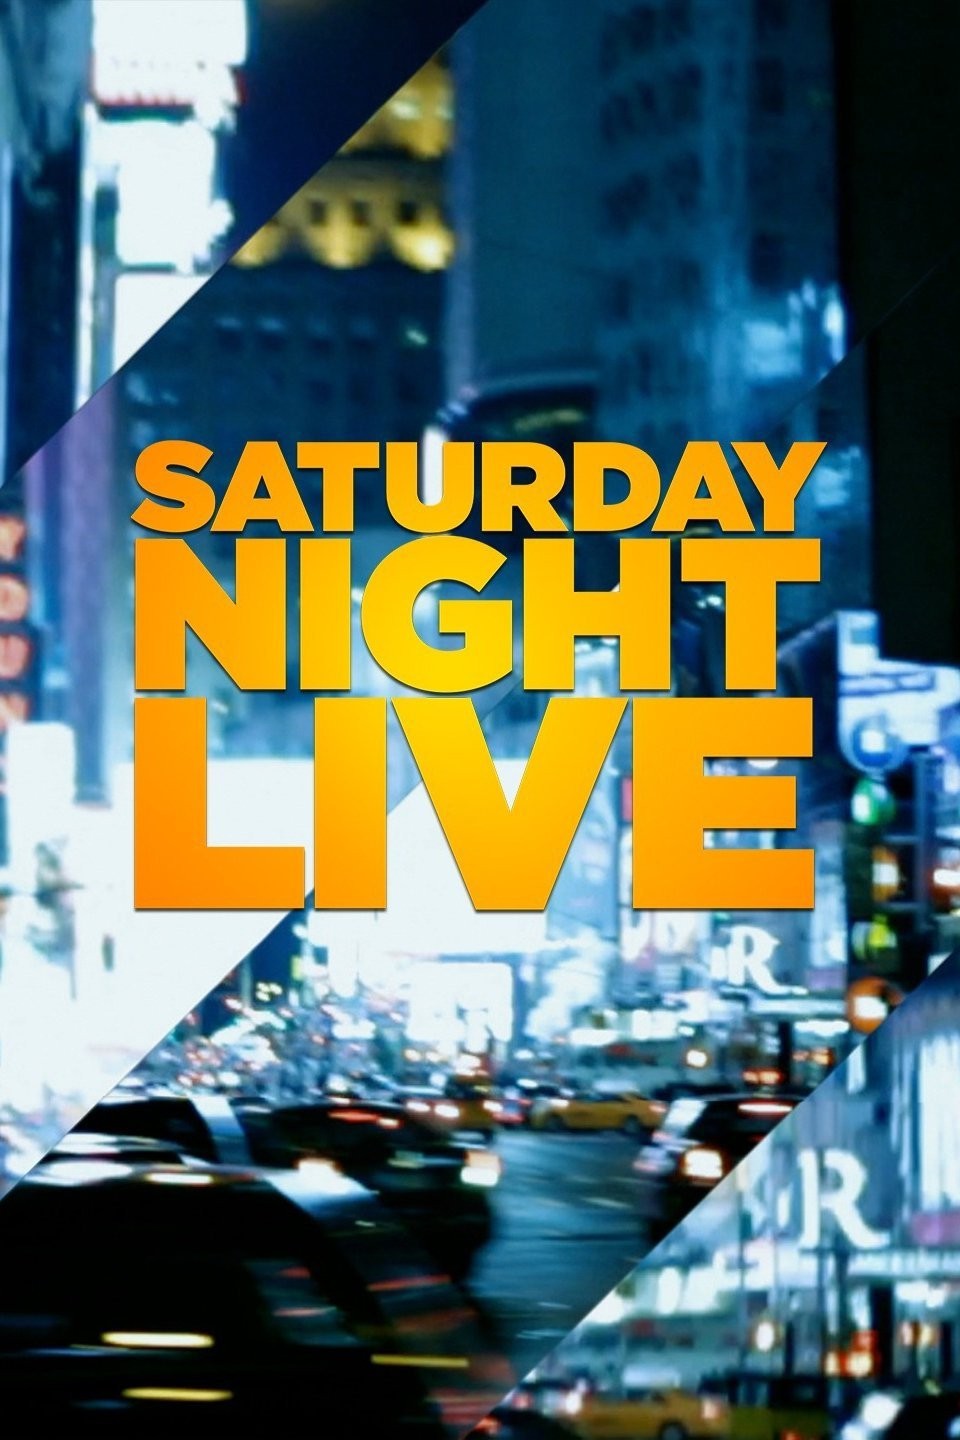 Who Is Hosting SNL During Season 48? Here's What to Know